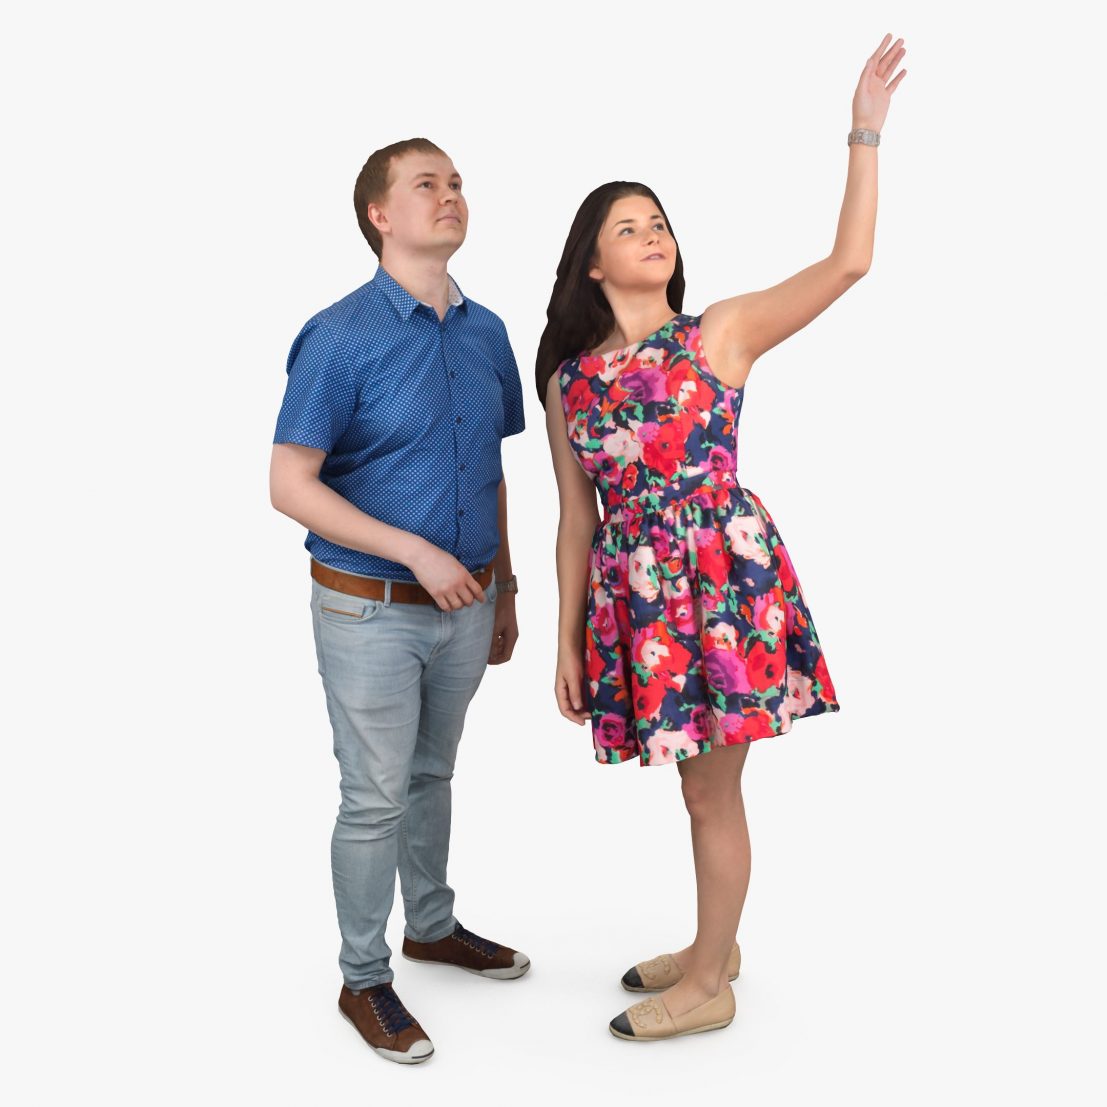 Man and Woman 3D Models | 3DTree Scanning Studio